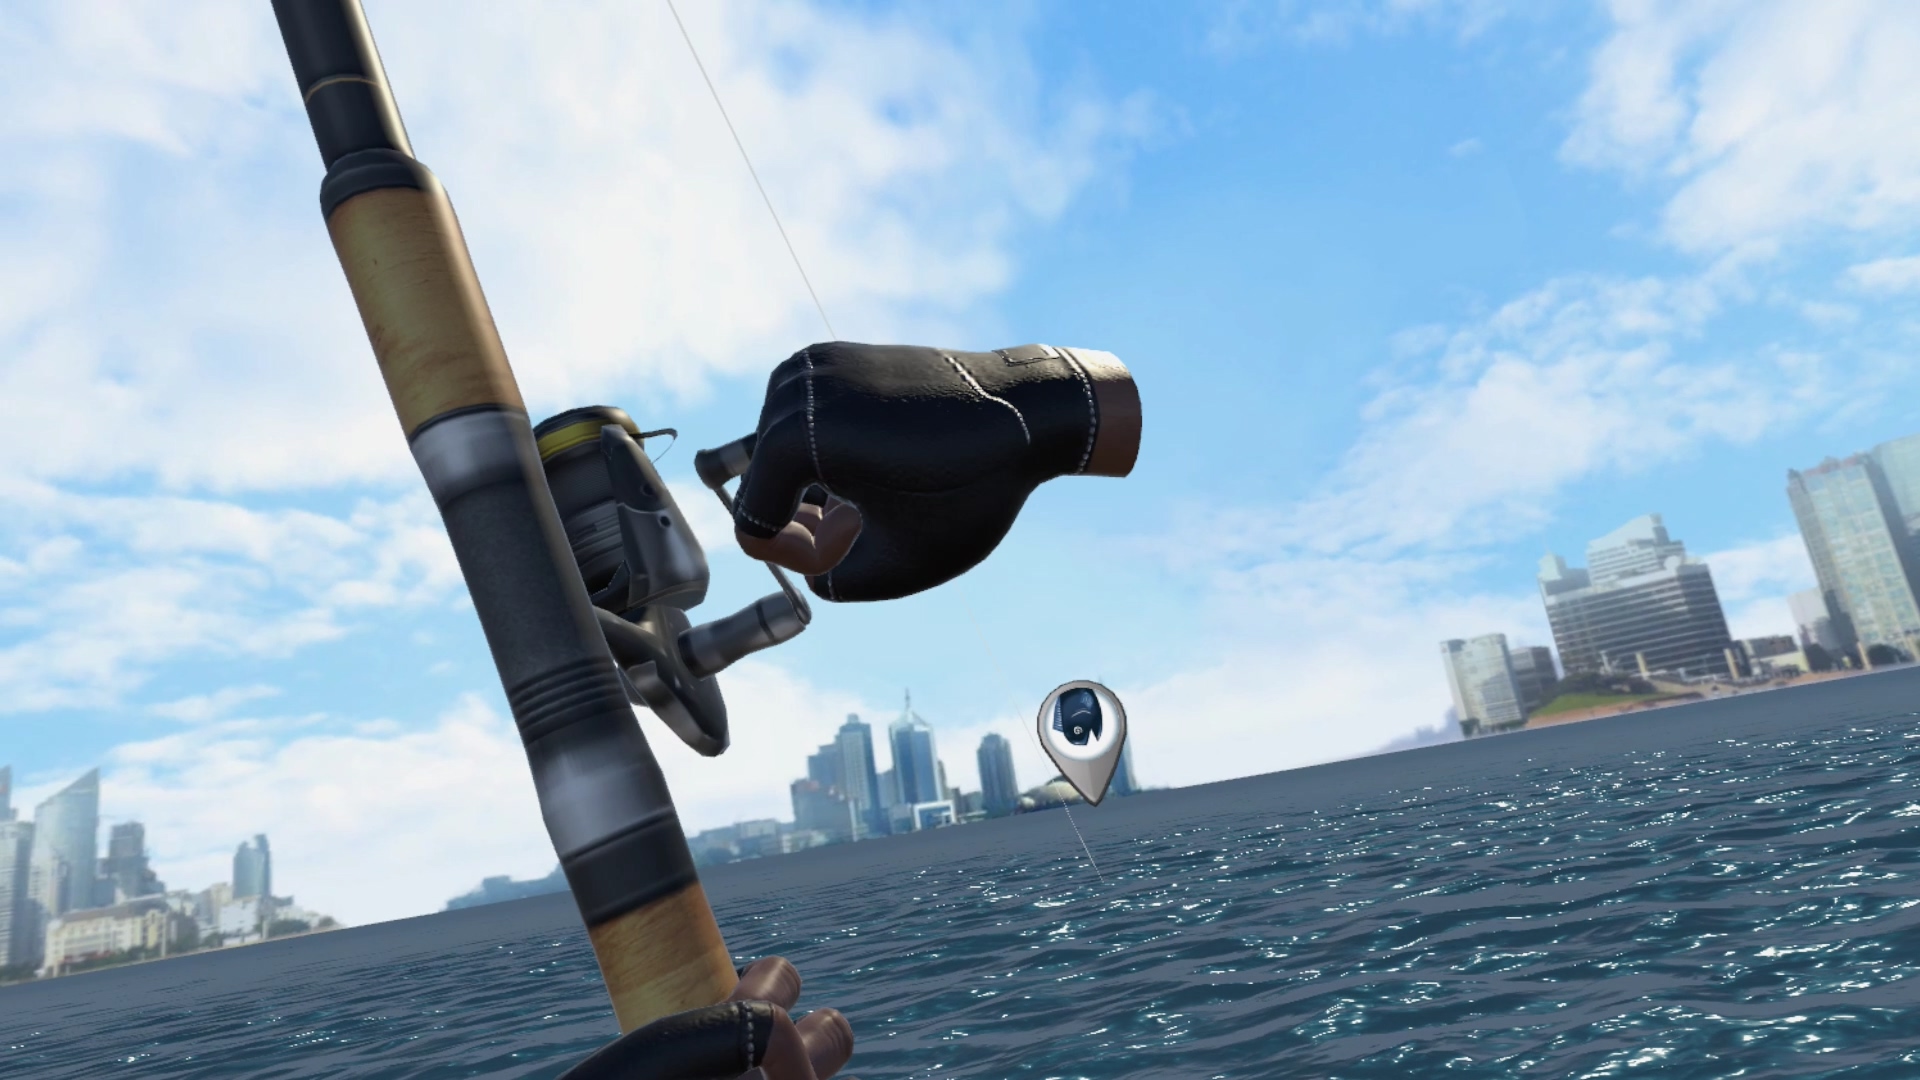 real vr fishing steam